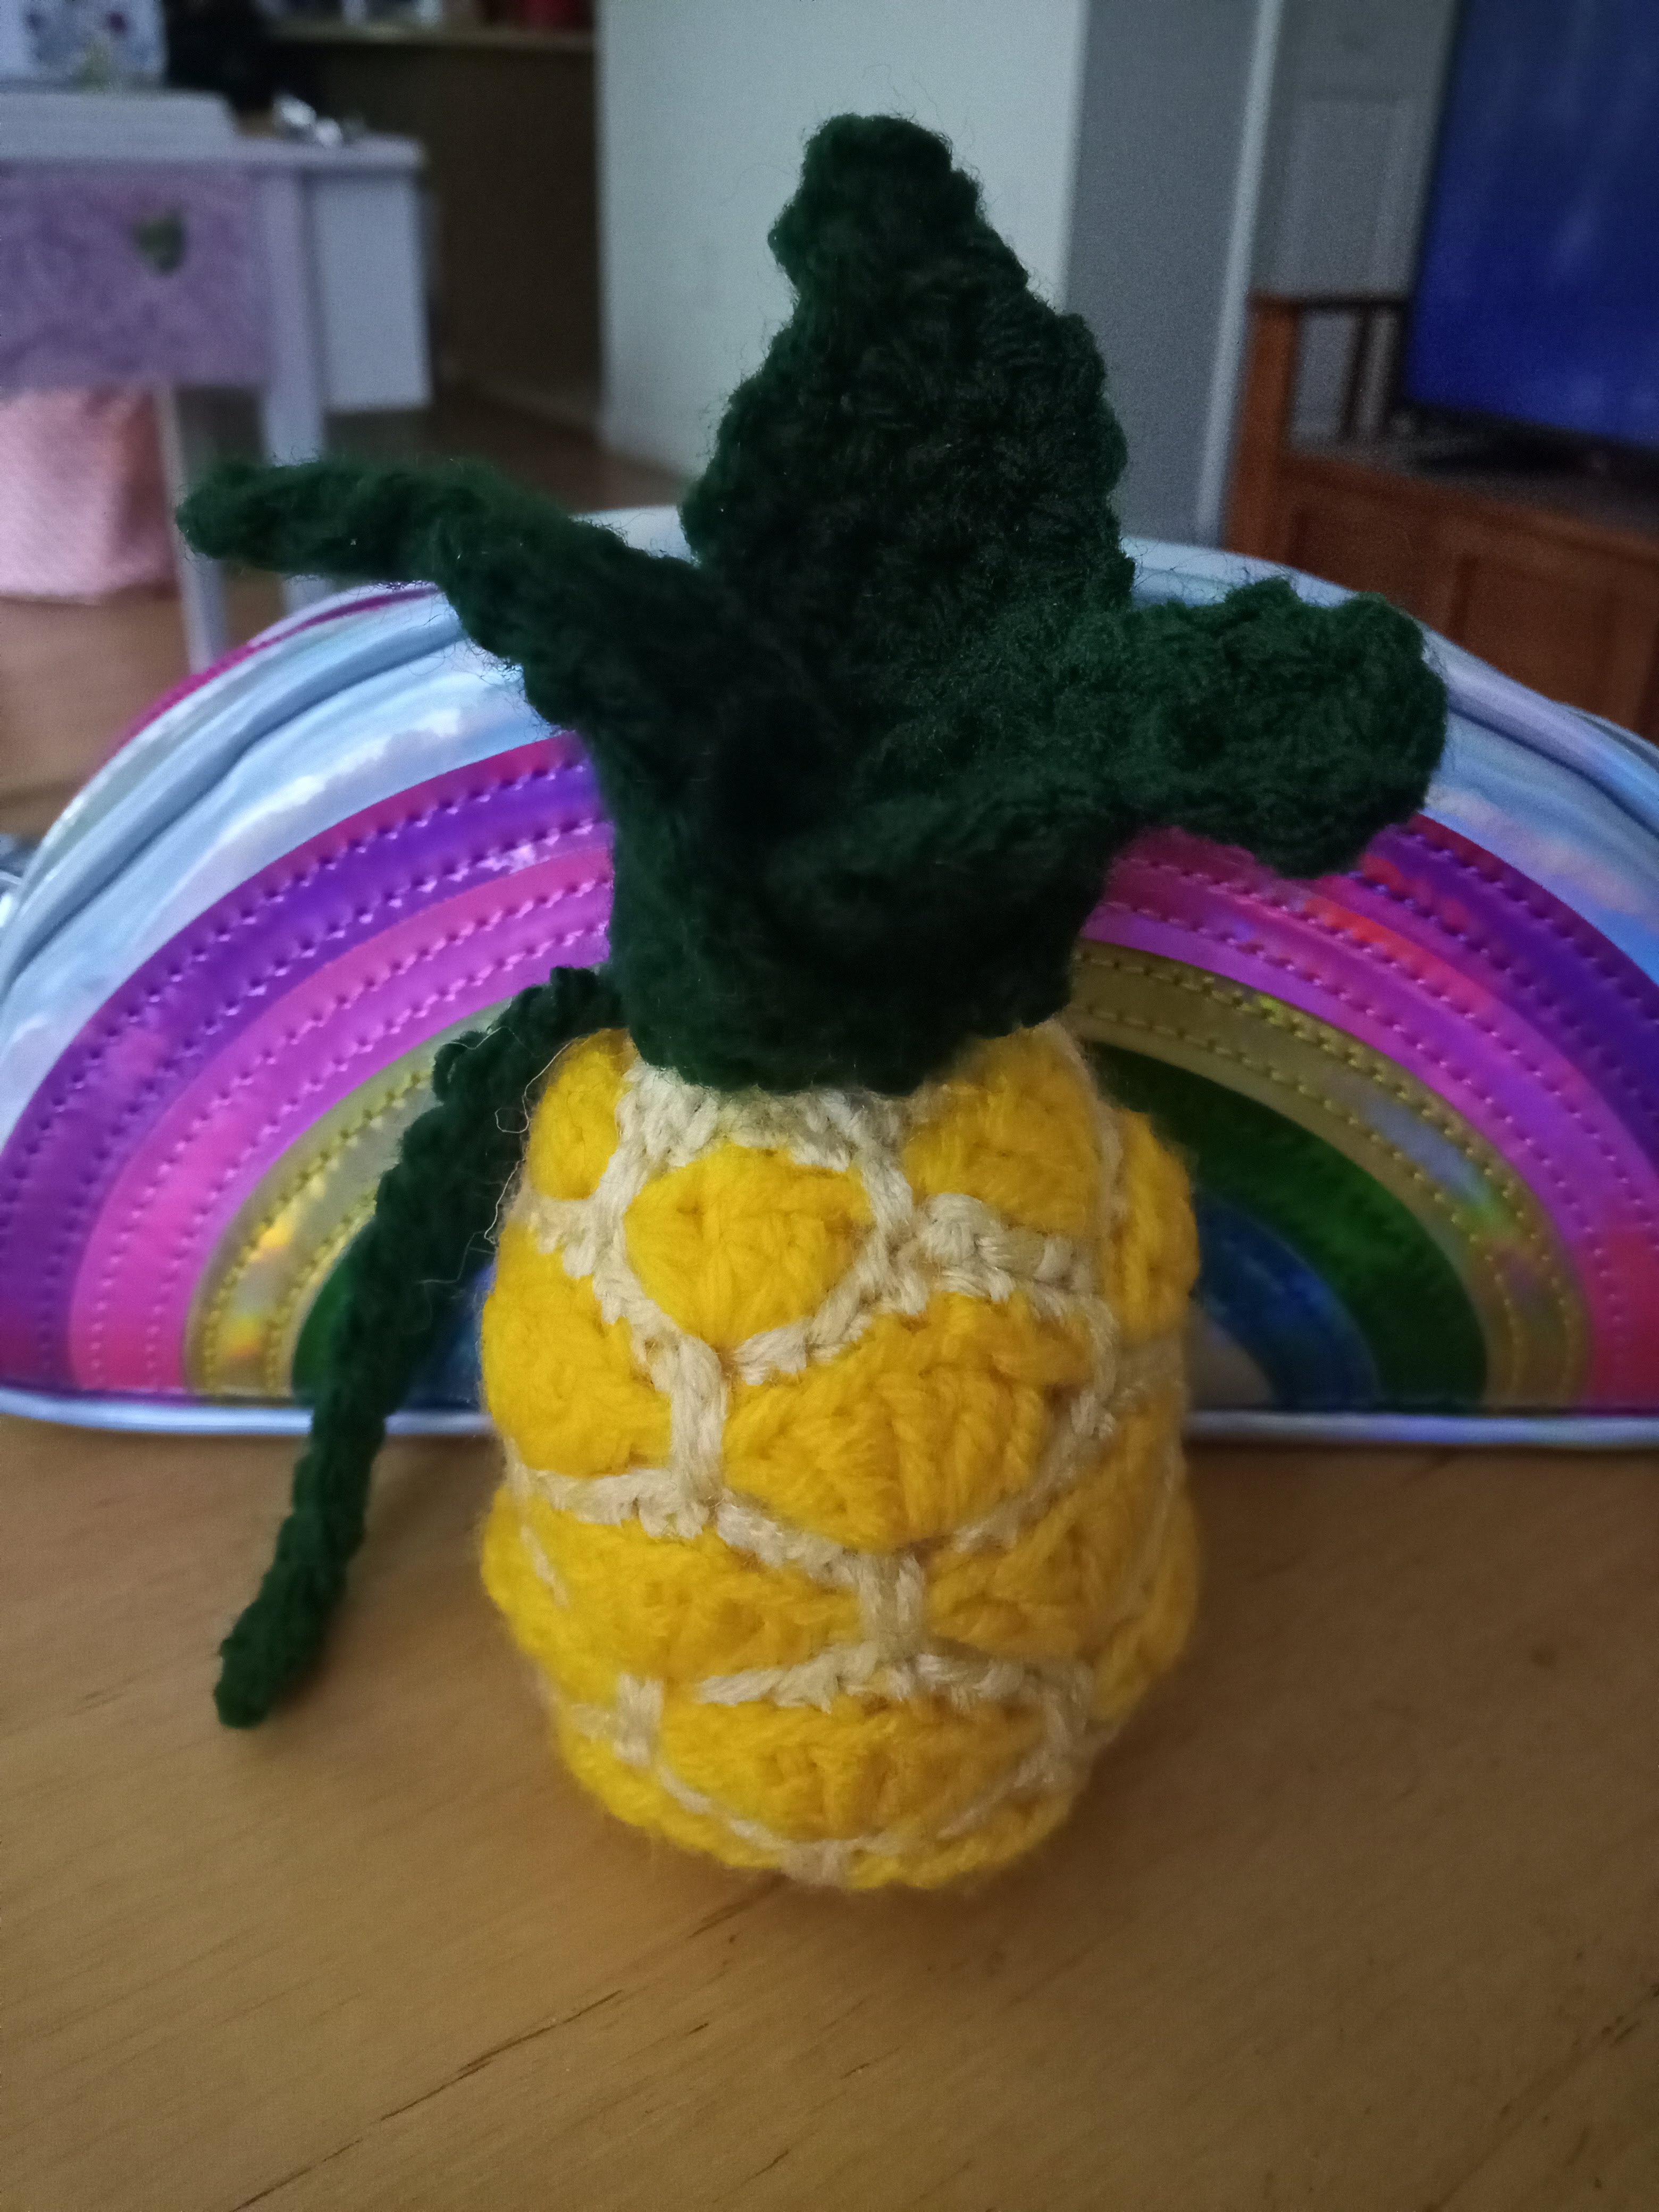 a small crocheted pineapple on a table in front of a rainbow shaped pencil bag